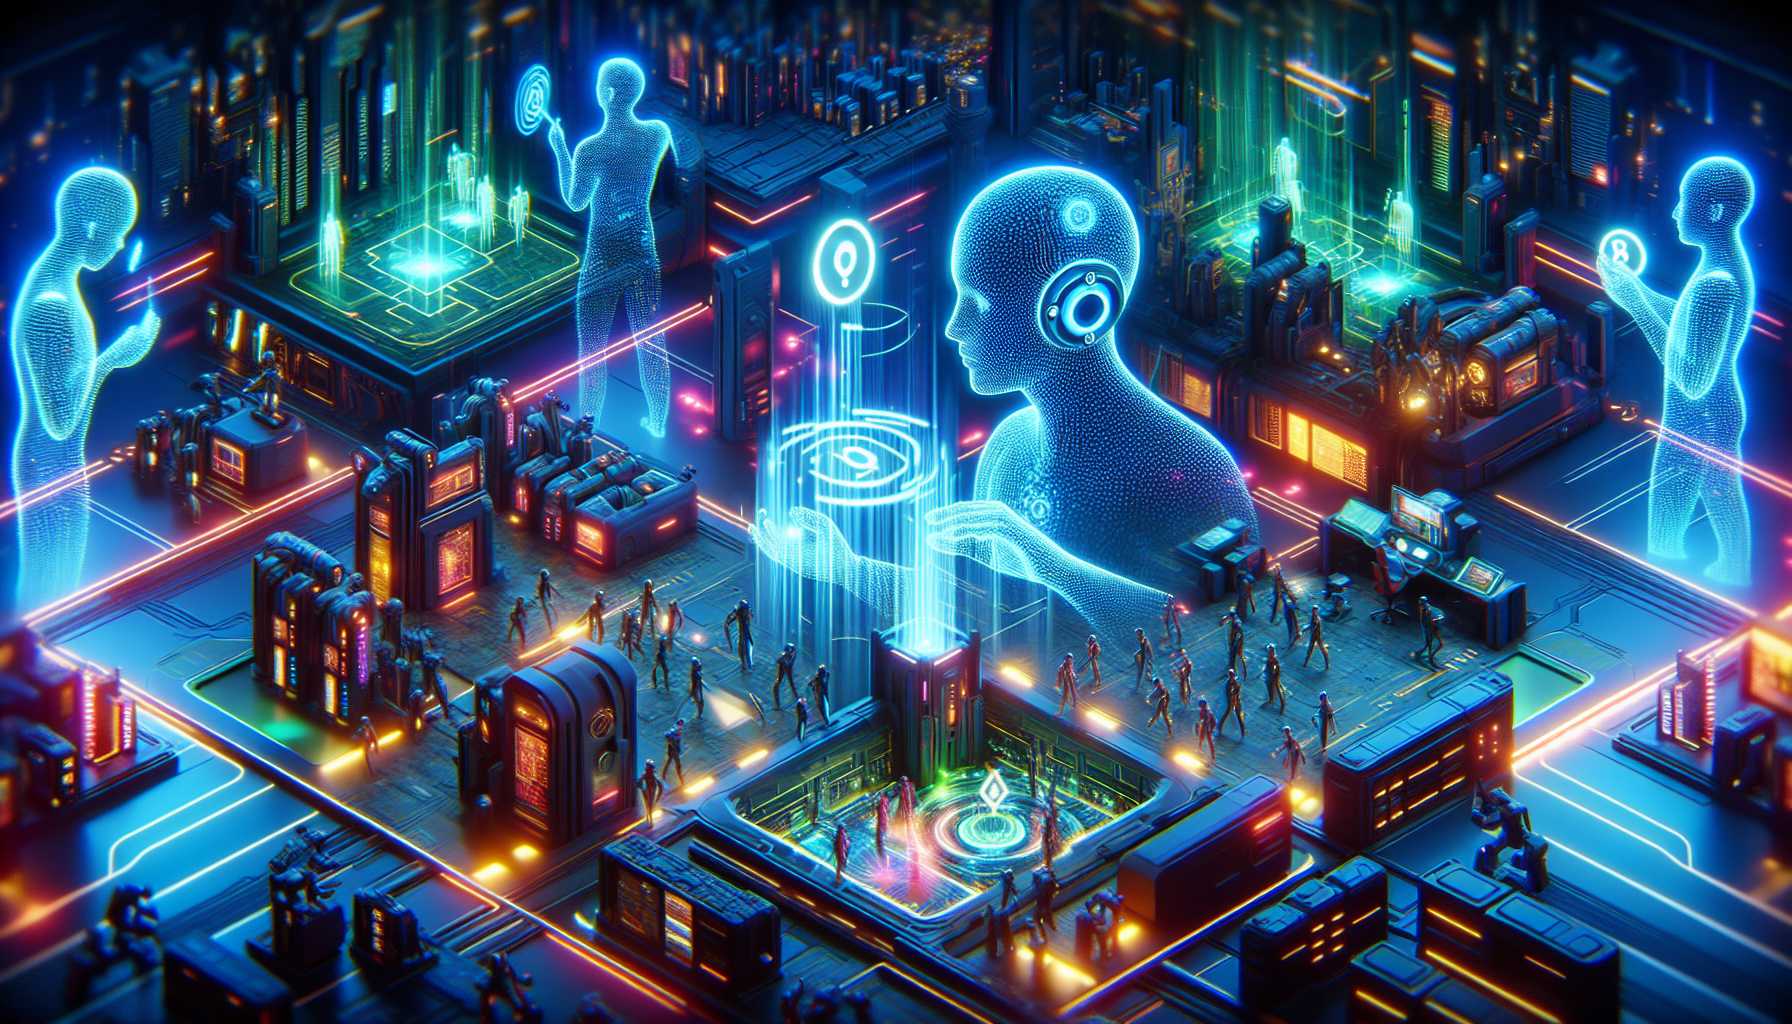 Futuristic depiction of AI and blockchain harmonizing in gaming